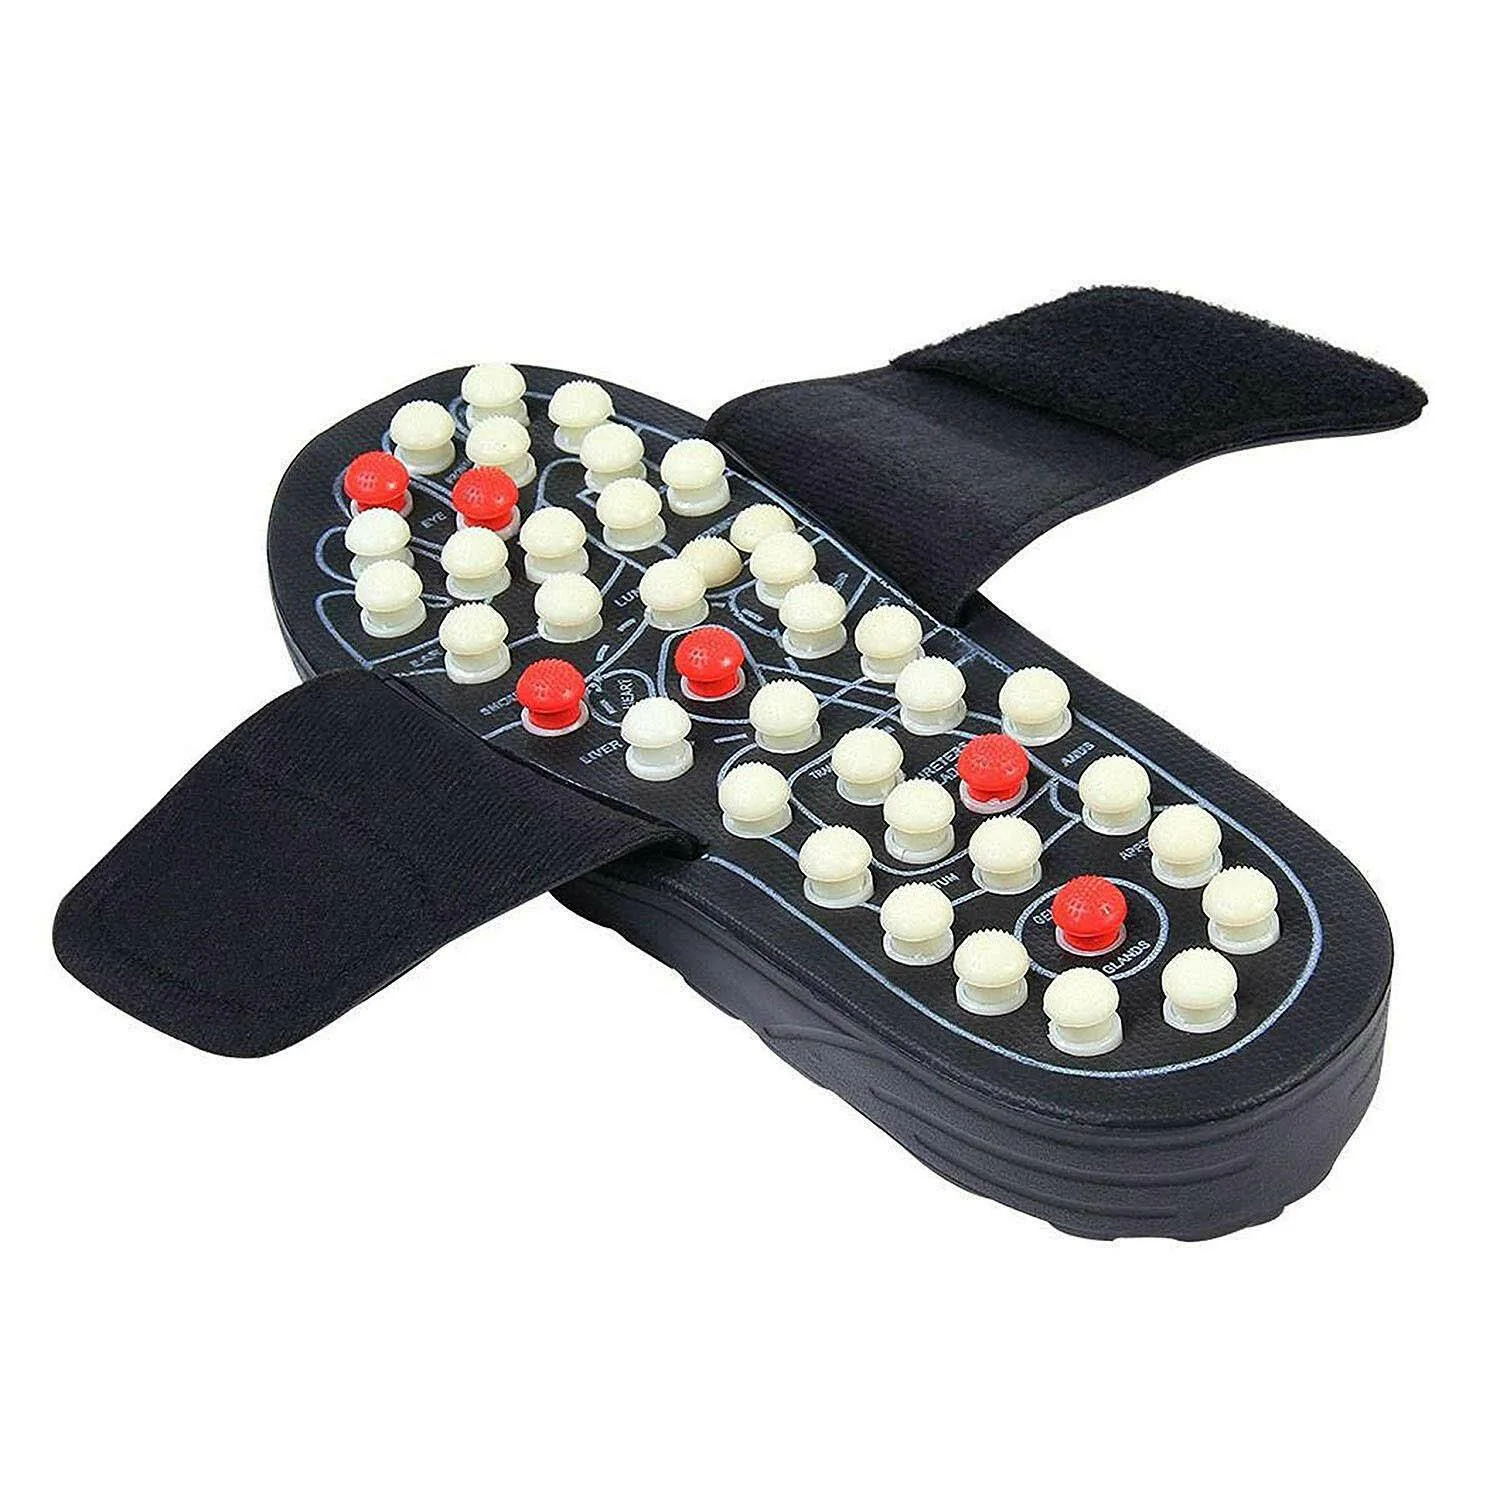 Grip Wooden Acupressure Slipper  Sandals  Chappal For Men  Women helps  to maintain good health gives you a soothing massage in the leg and for  reflexology or relieves from strain and pain